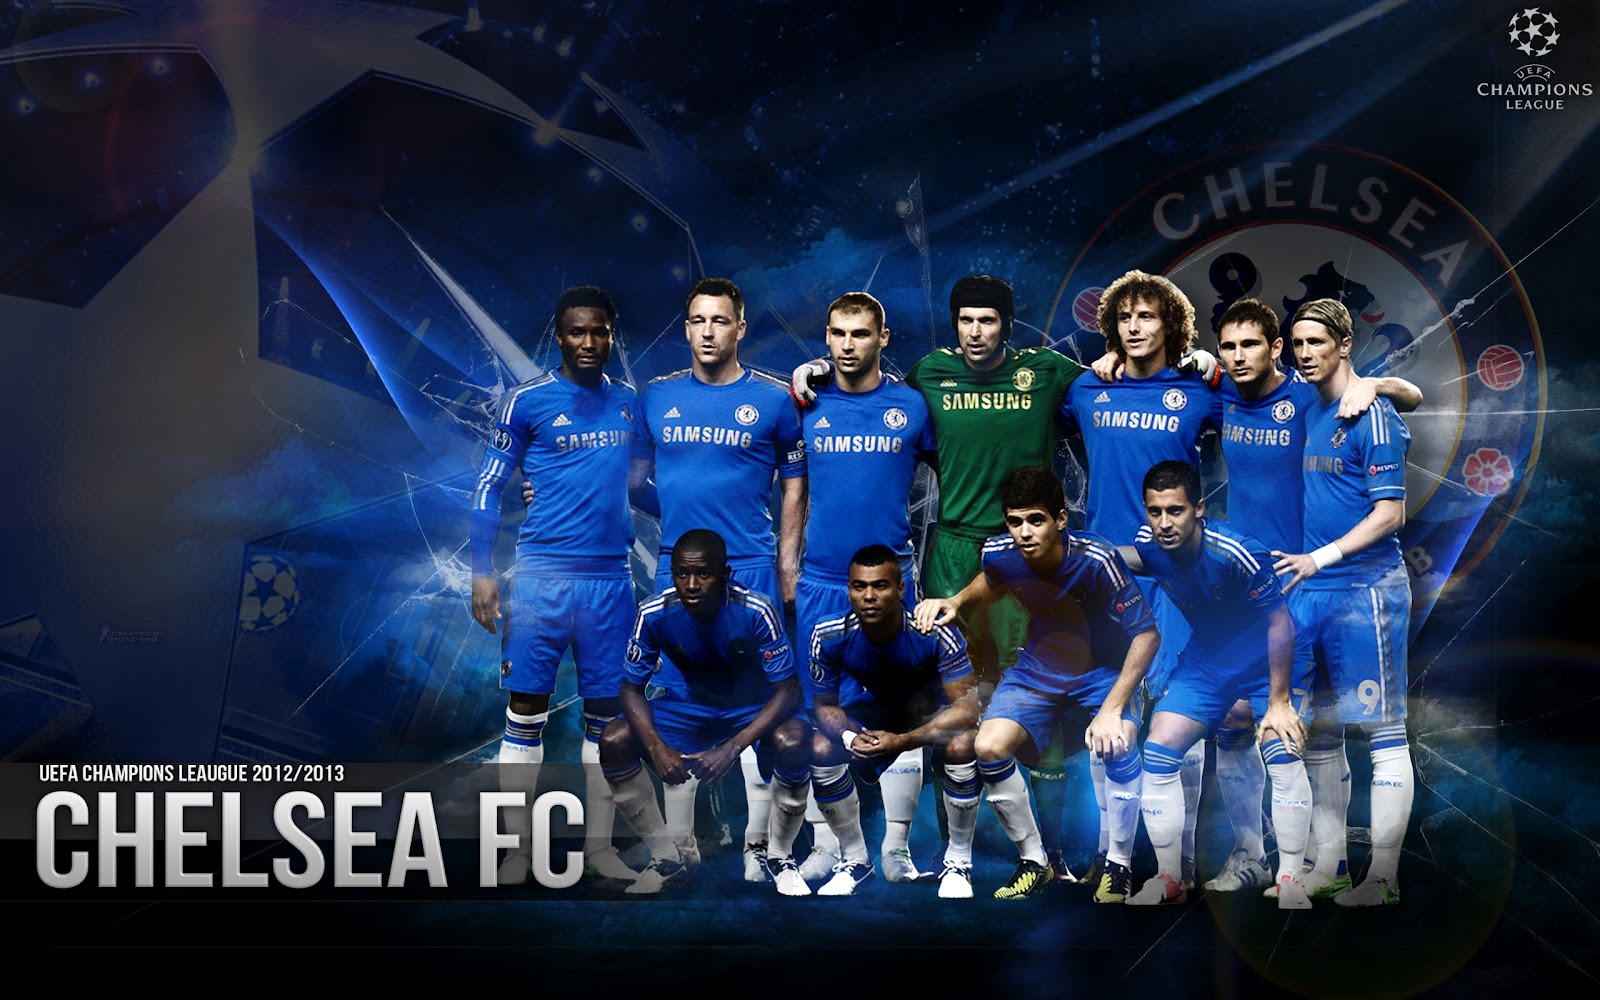 Free Download Download Image Chelsea Wallpaper For Desktop Hd 2013 Football Pc 1600x1000 For Your Desktop Mobile Tablet Explore 46 Chelsea Football Club Wallpaper Chelsea Fc Logo Wallpaper Chelsea